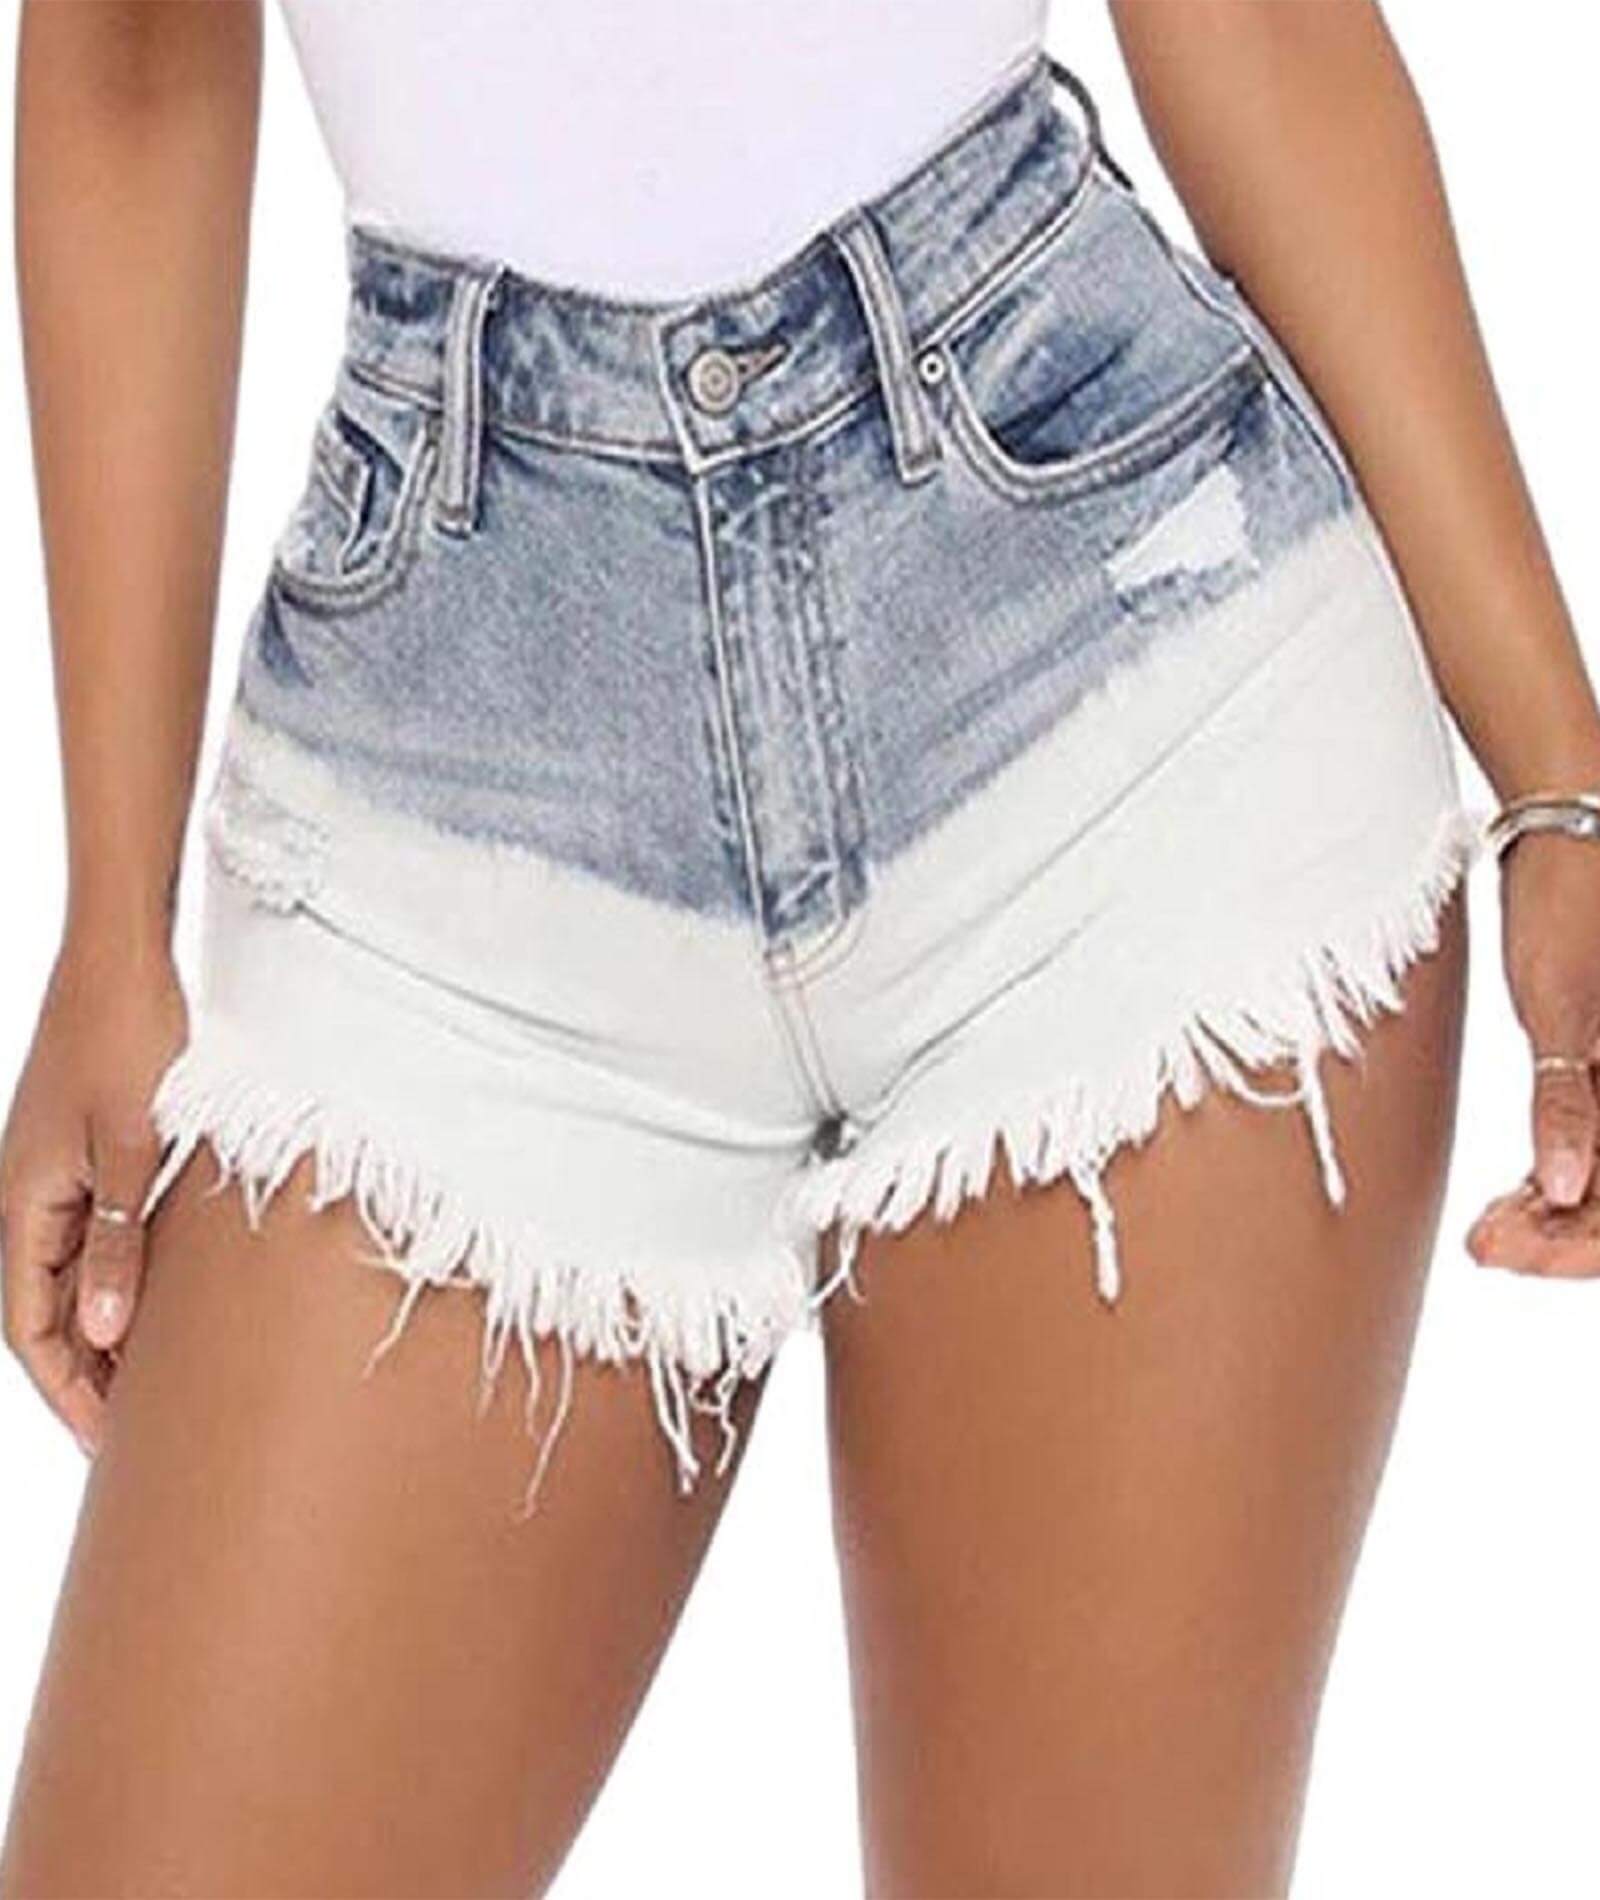  Women's High Waist Destroyed Ripped Hole Club Hot Pants Fringed Denim Jean Shorts